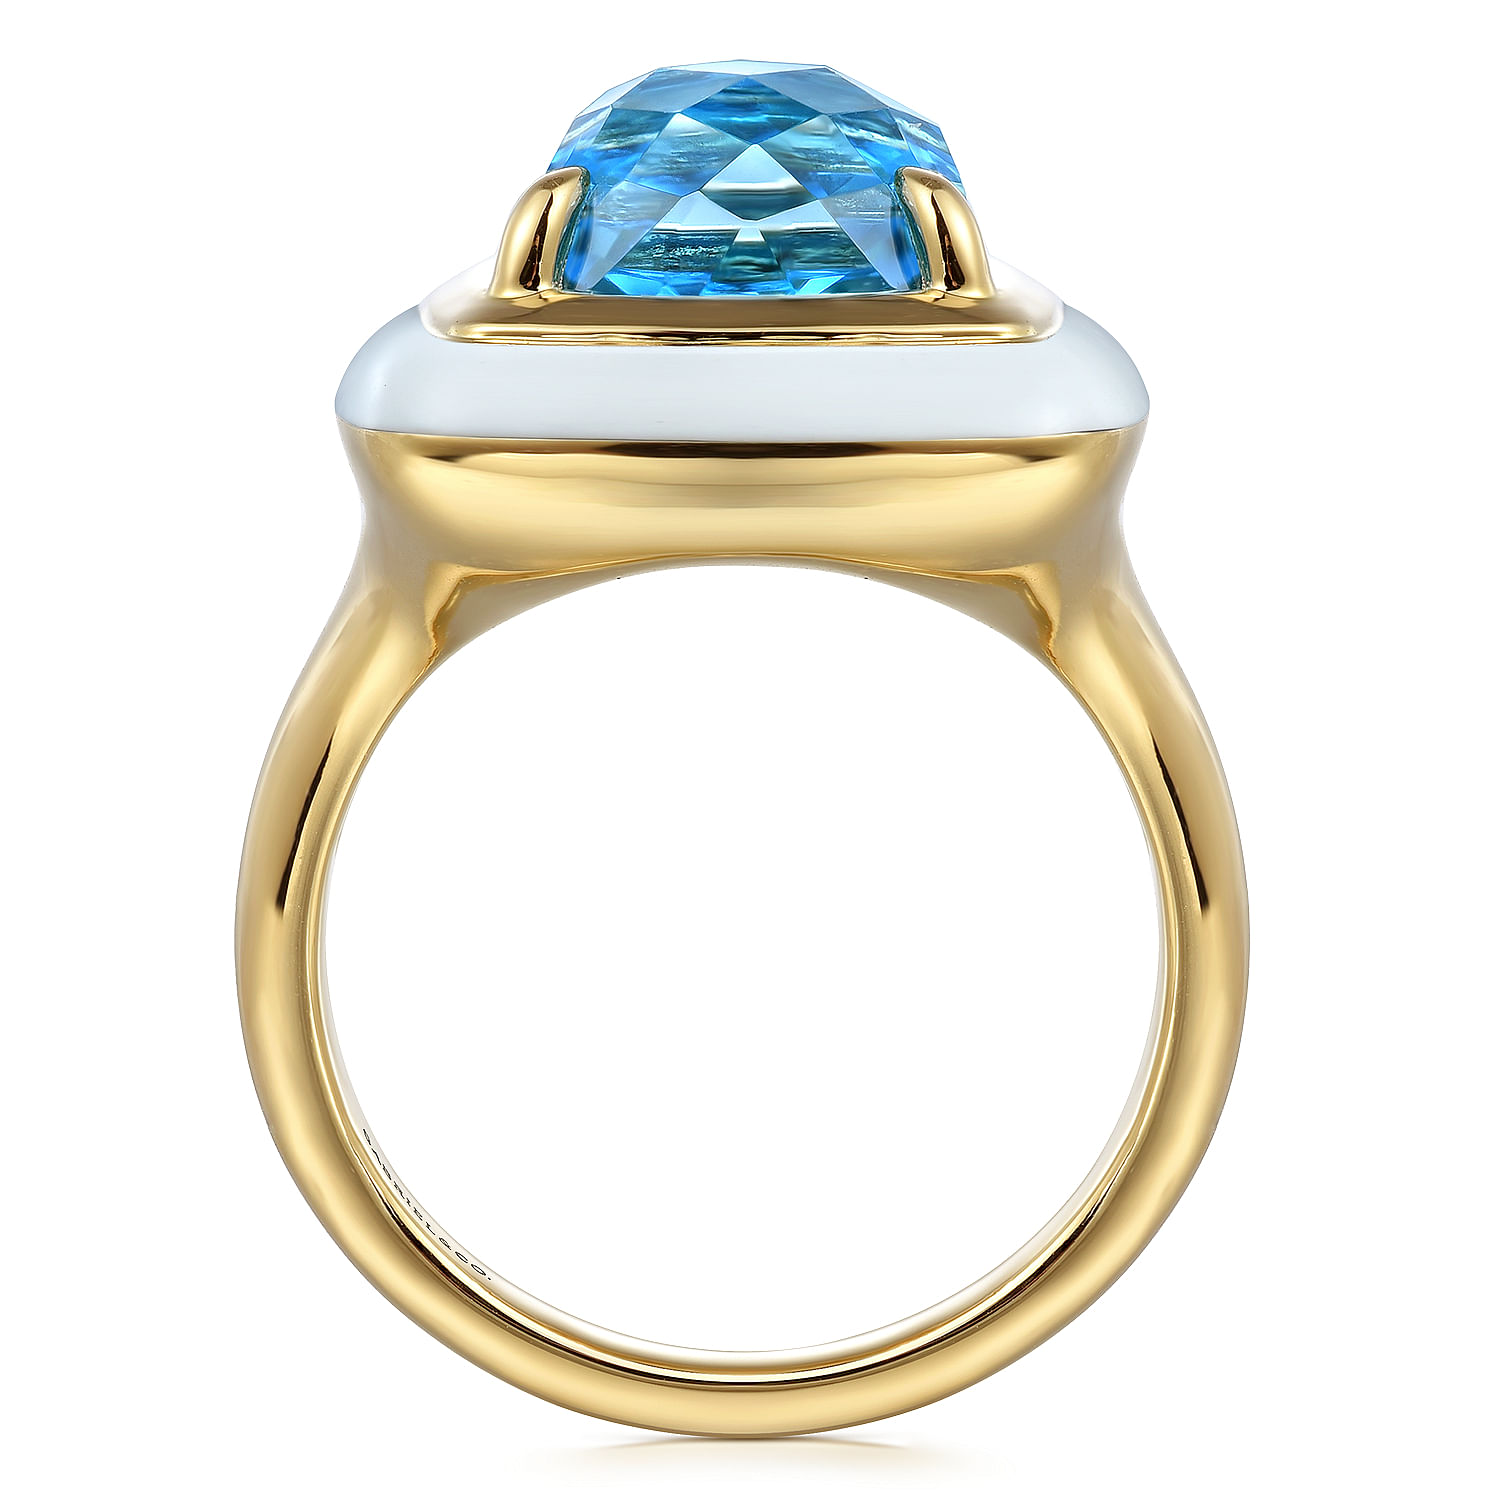 14K Yellow Gold Blue Topaz Cushion Cut Ladies Ring With Flower Pattern J-Back and White Enamel